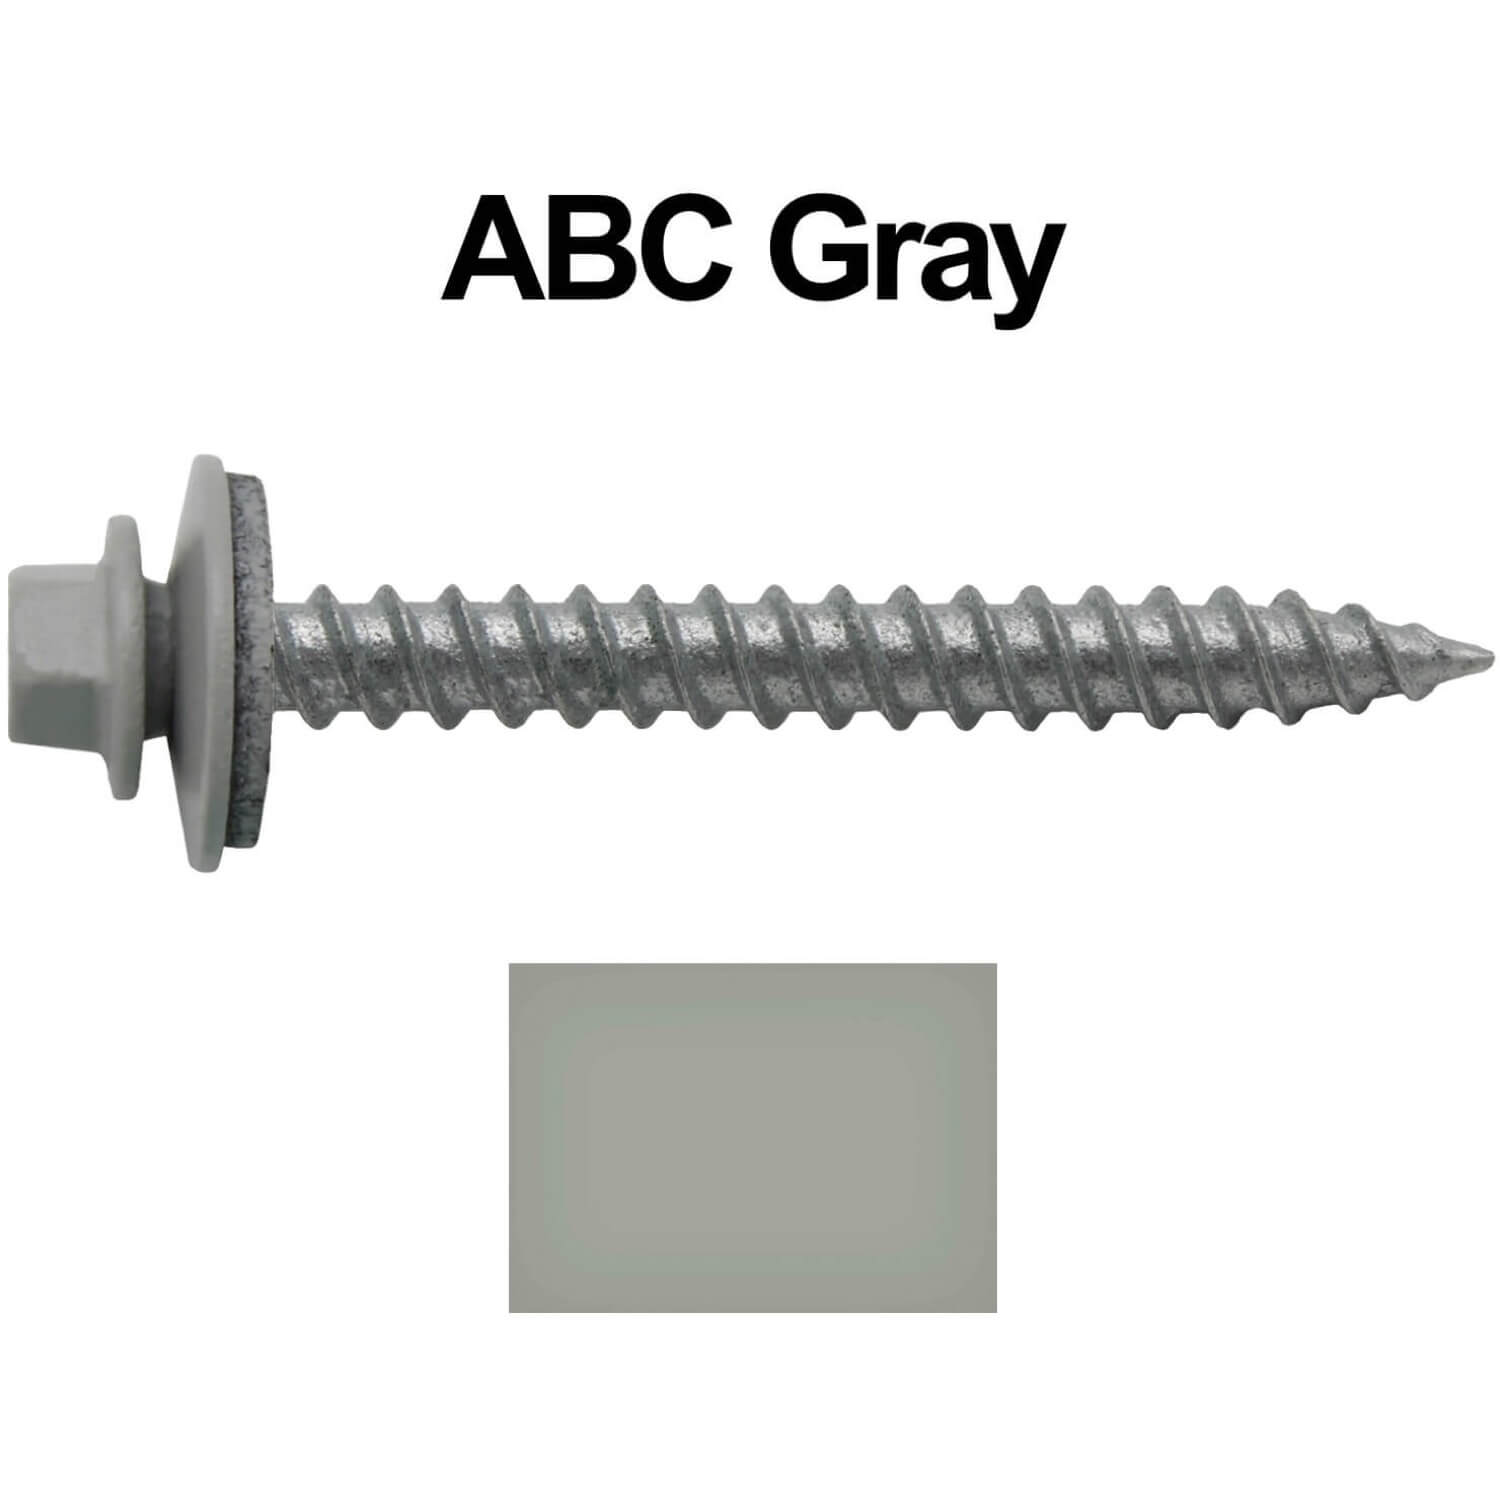 Multiple Sizes in Listing siding Screws with EPDM Washer Seal.100 PCS #10 x 3 Hex Washer Head Metal Roof Screw. #10 x 3 Self Starting/self Tapping Metal to Wood Sheet Metal Roofing 